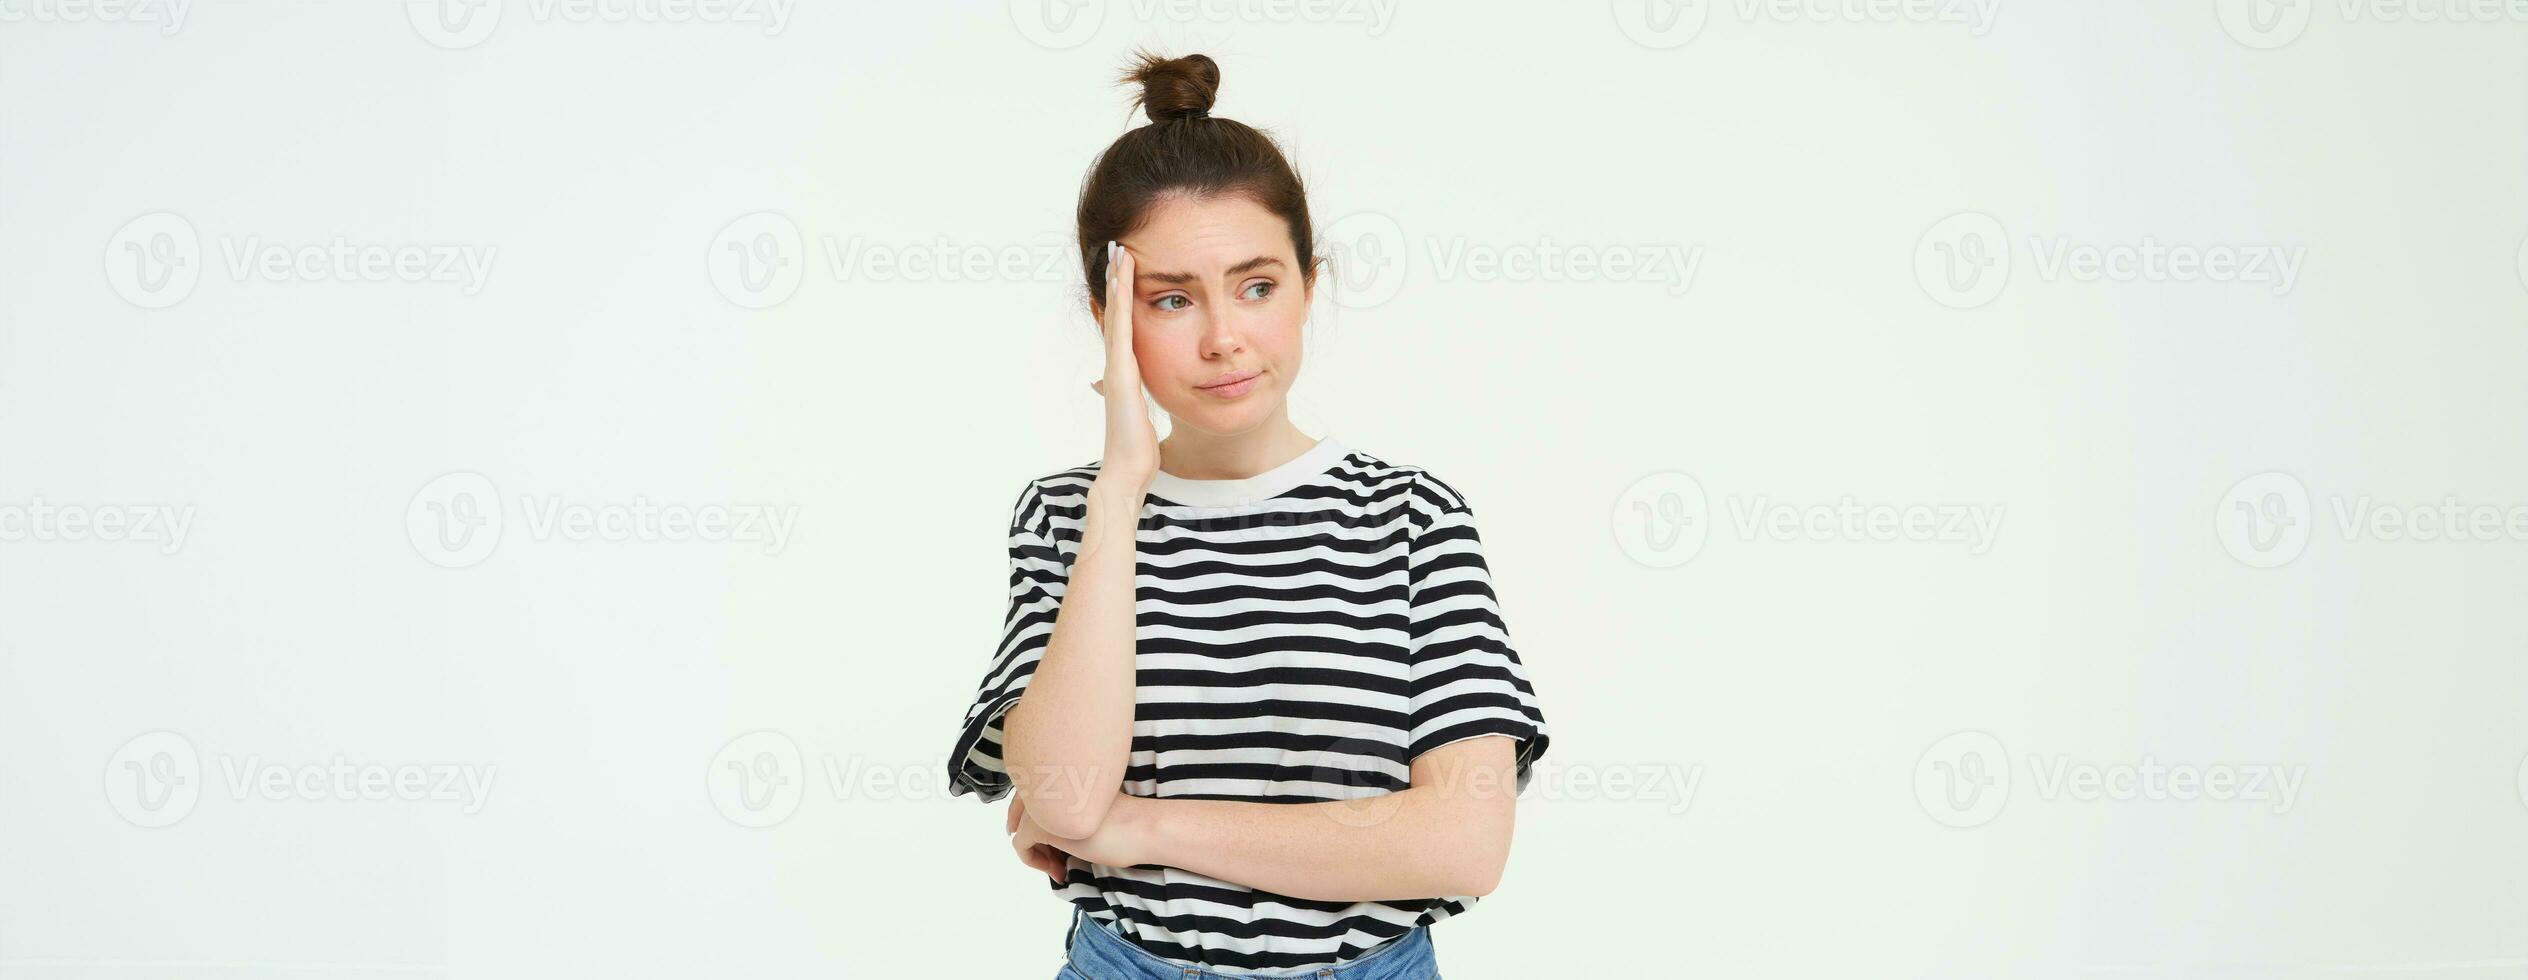 Portrait of concerned, worried young woman, touches her head, looking complicated, standing over white background photo